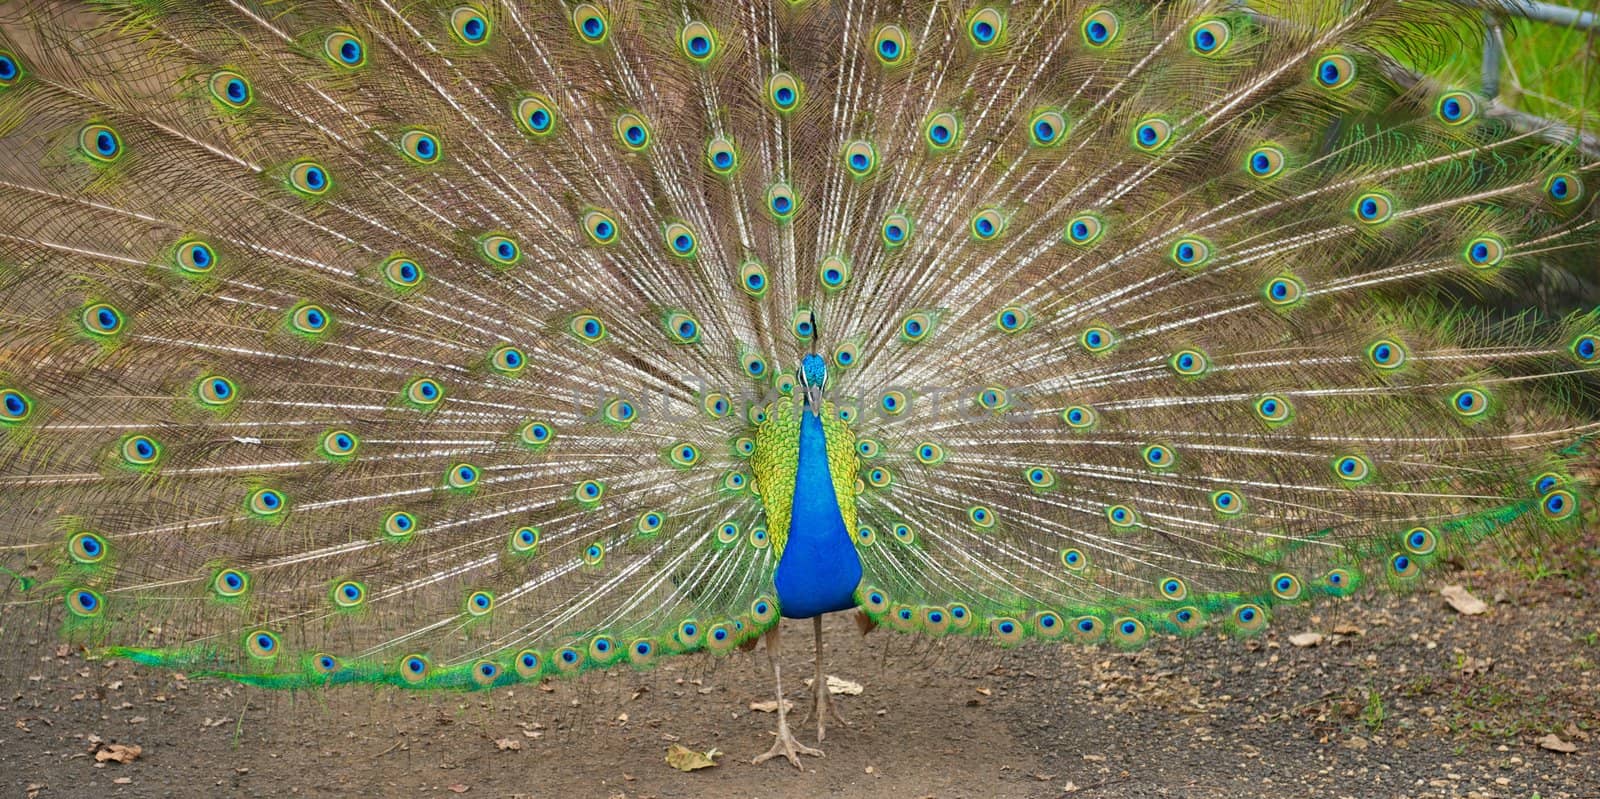 A vibrant blue peacock strutting with its feathers spread